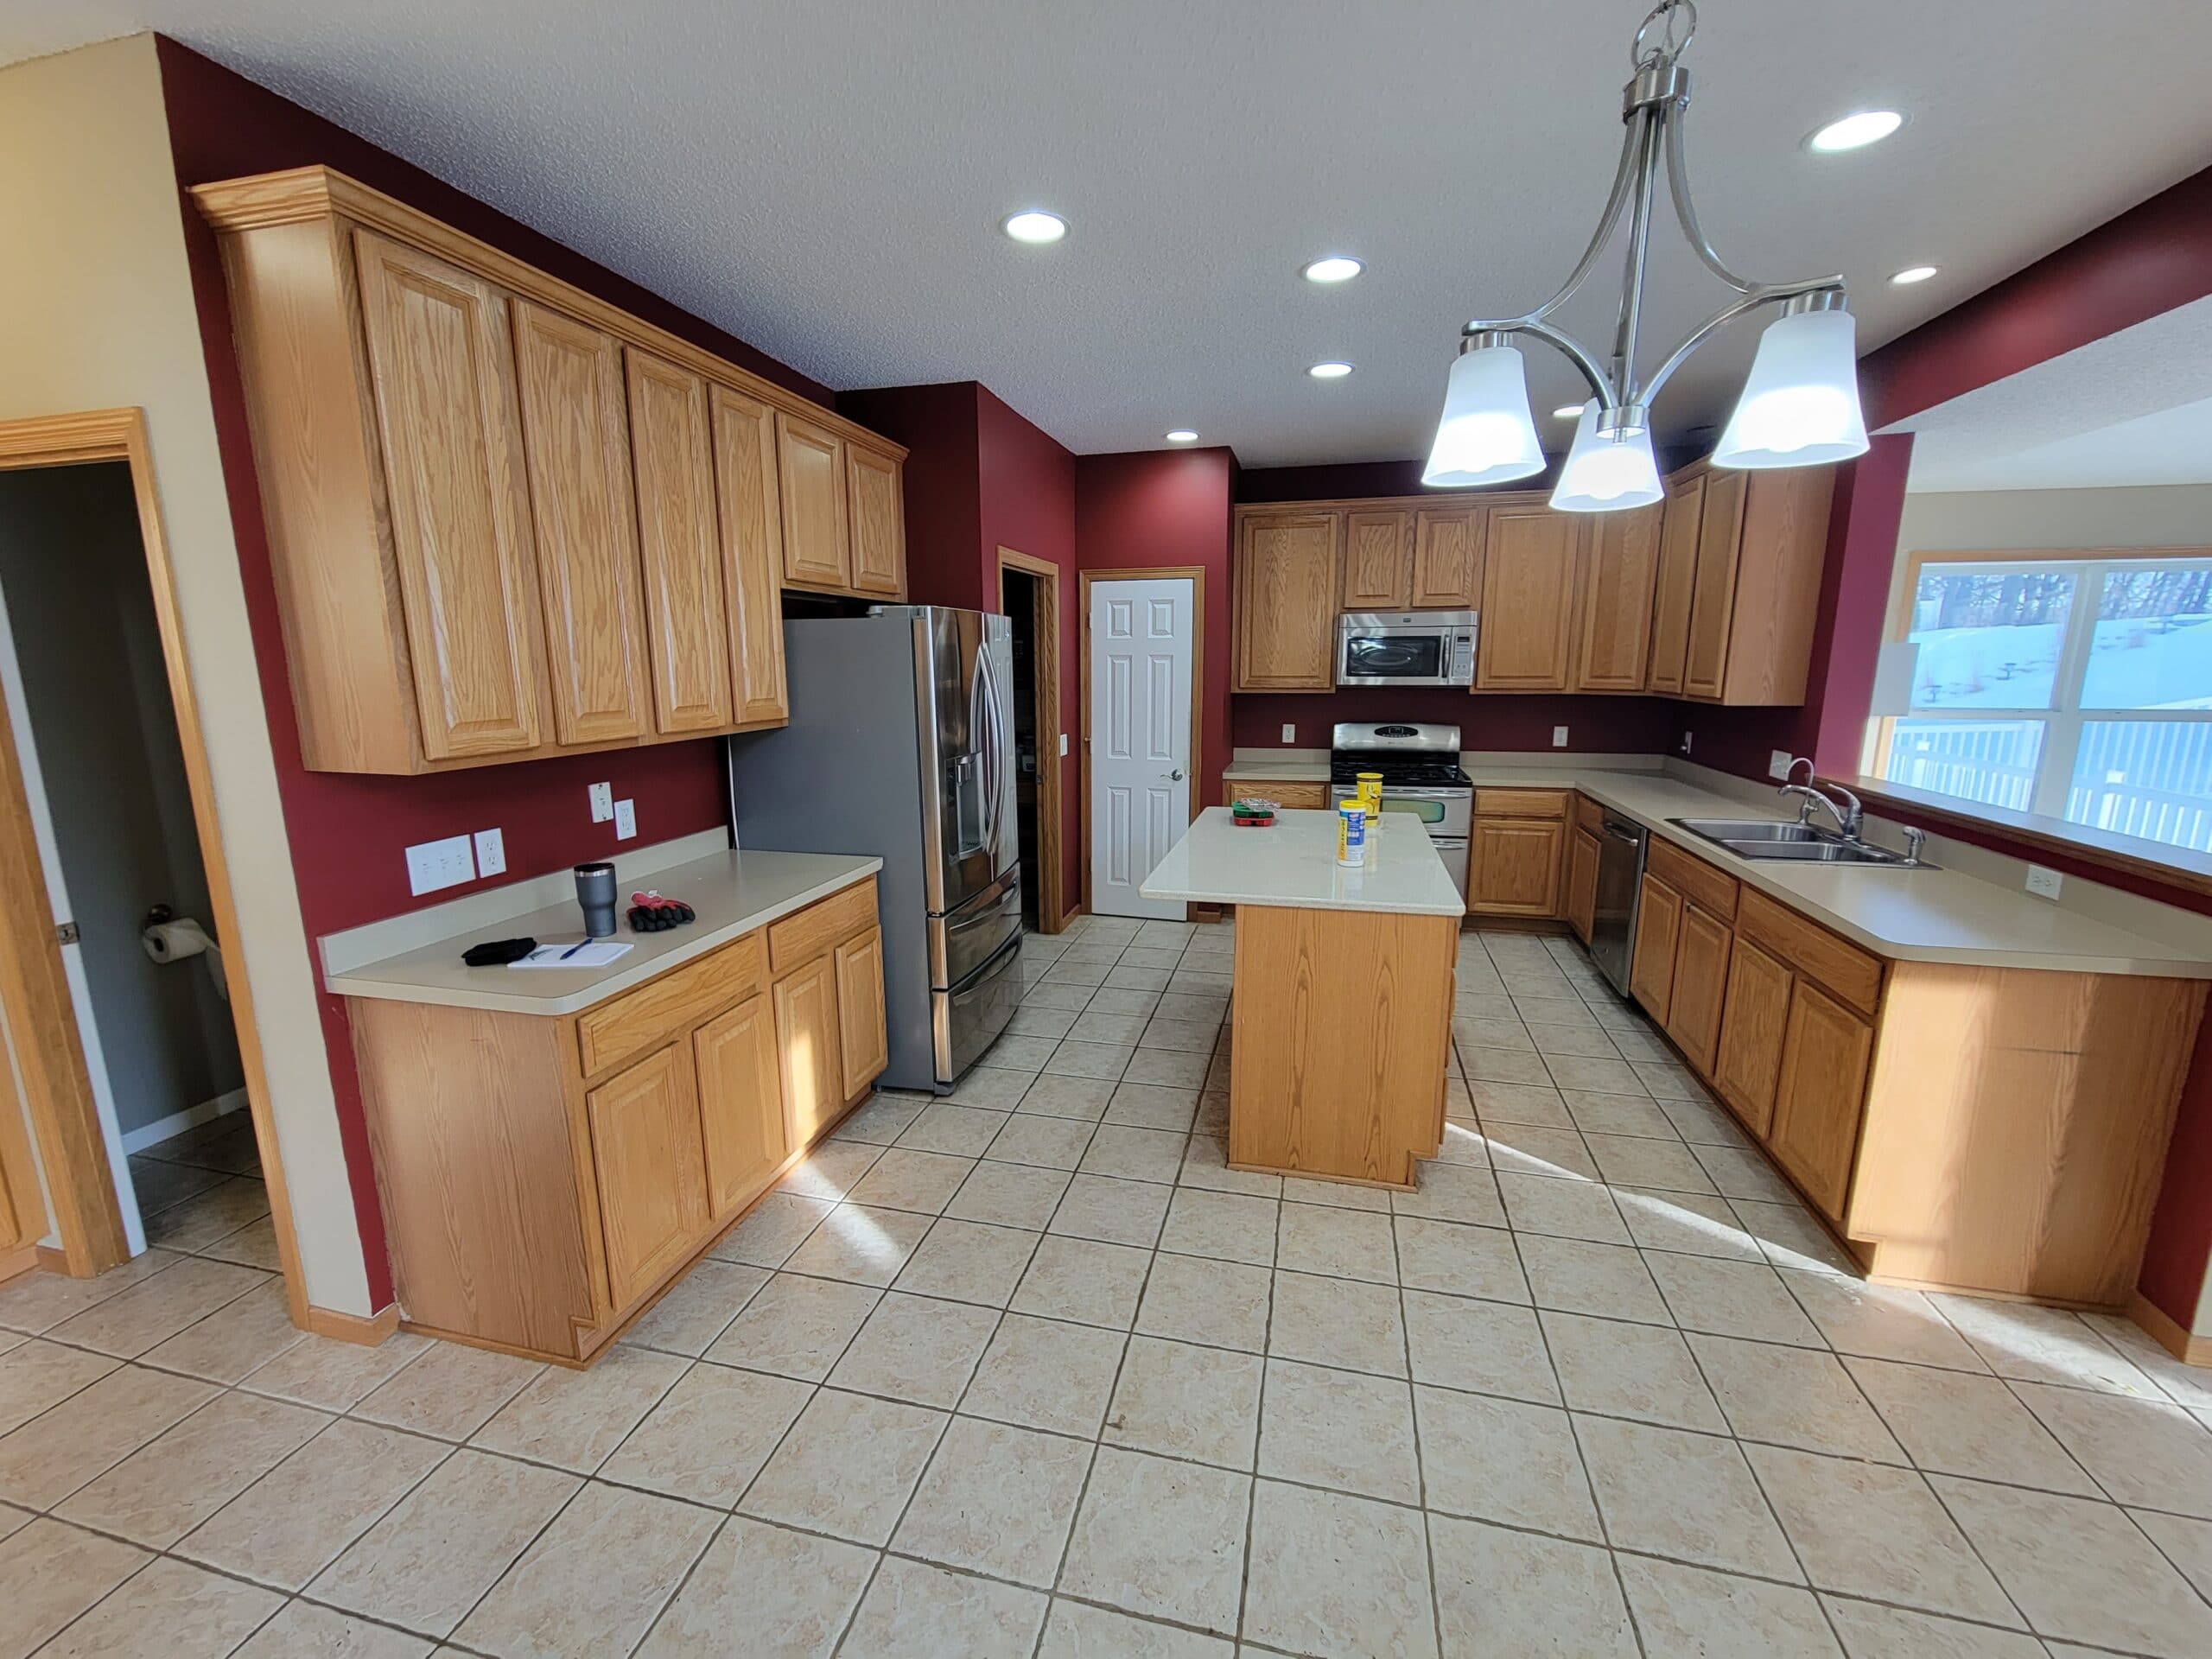 Luxury kitchen remodeling company in Lakeland, MN